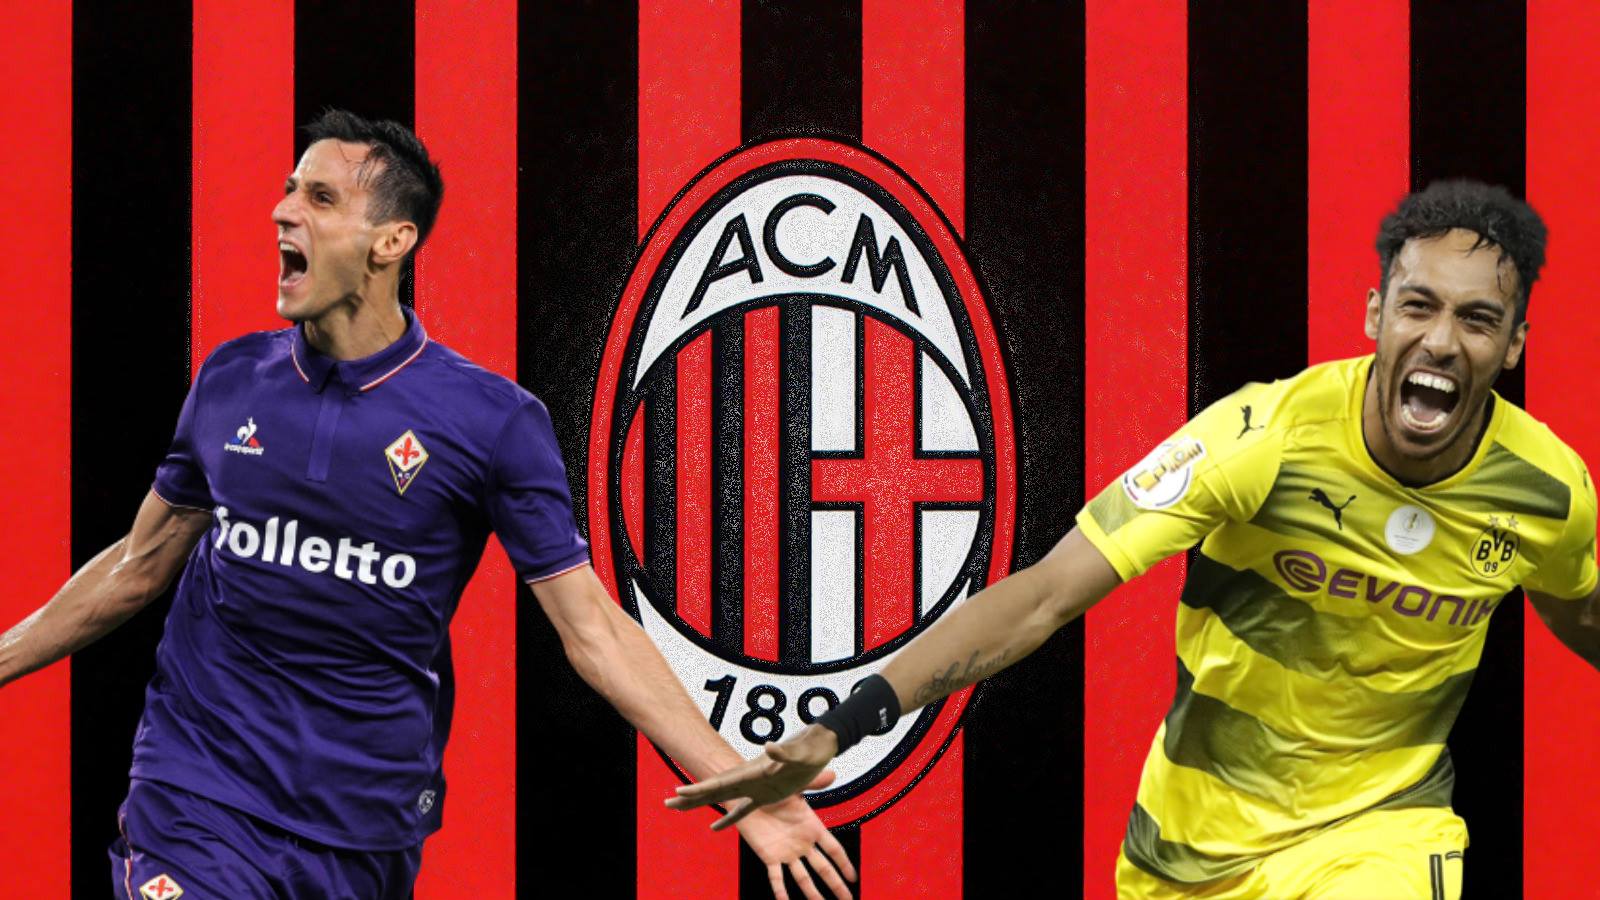 overflow get revolution AC Milan, Kalinic plus Aubameyang. Two attackers instead of one - AC Milan  News